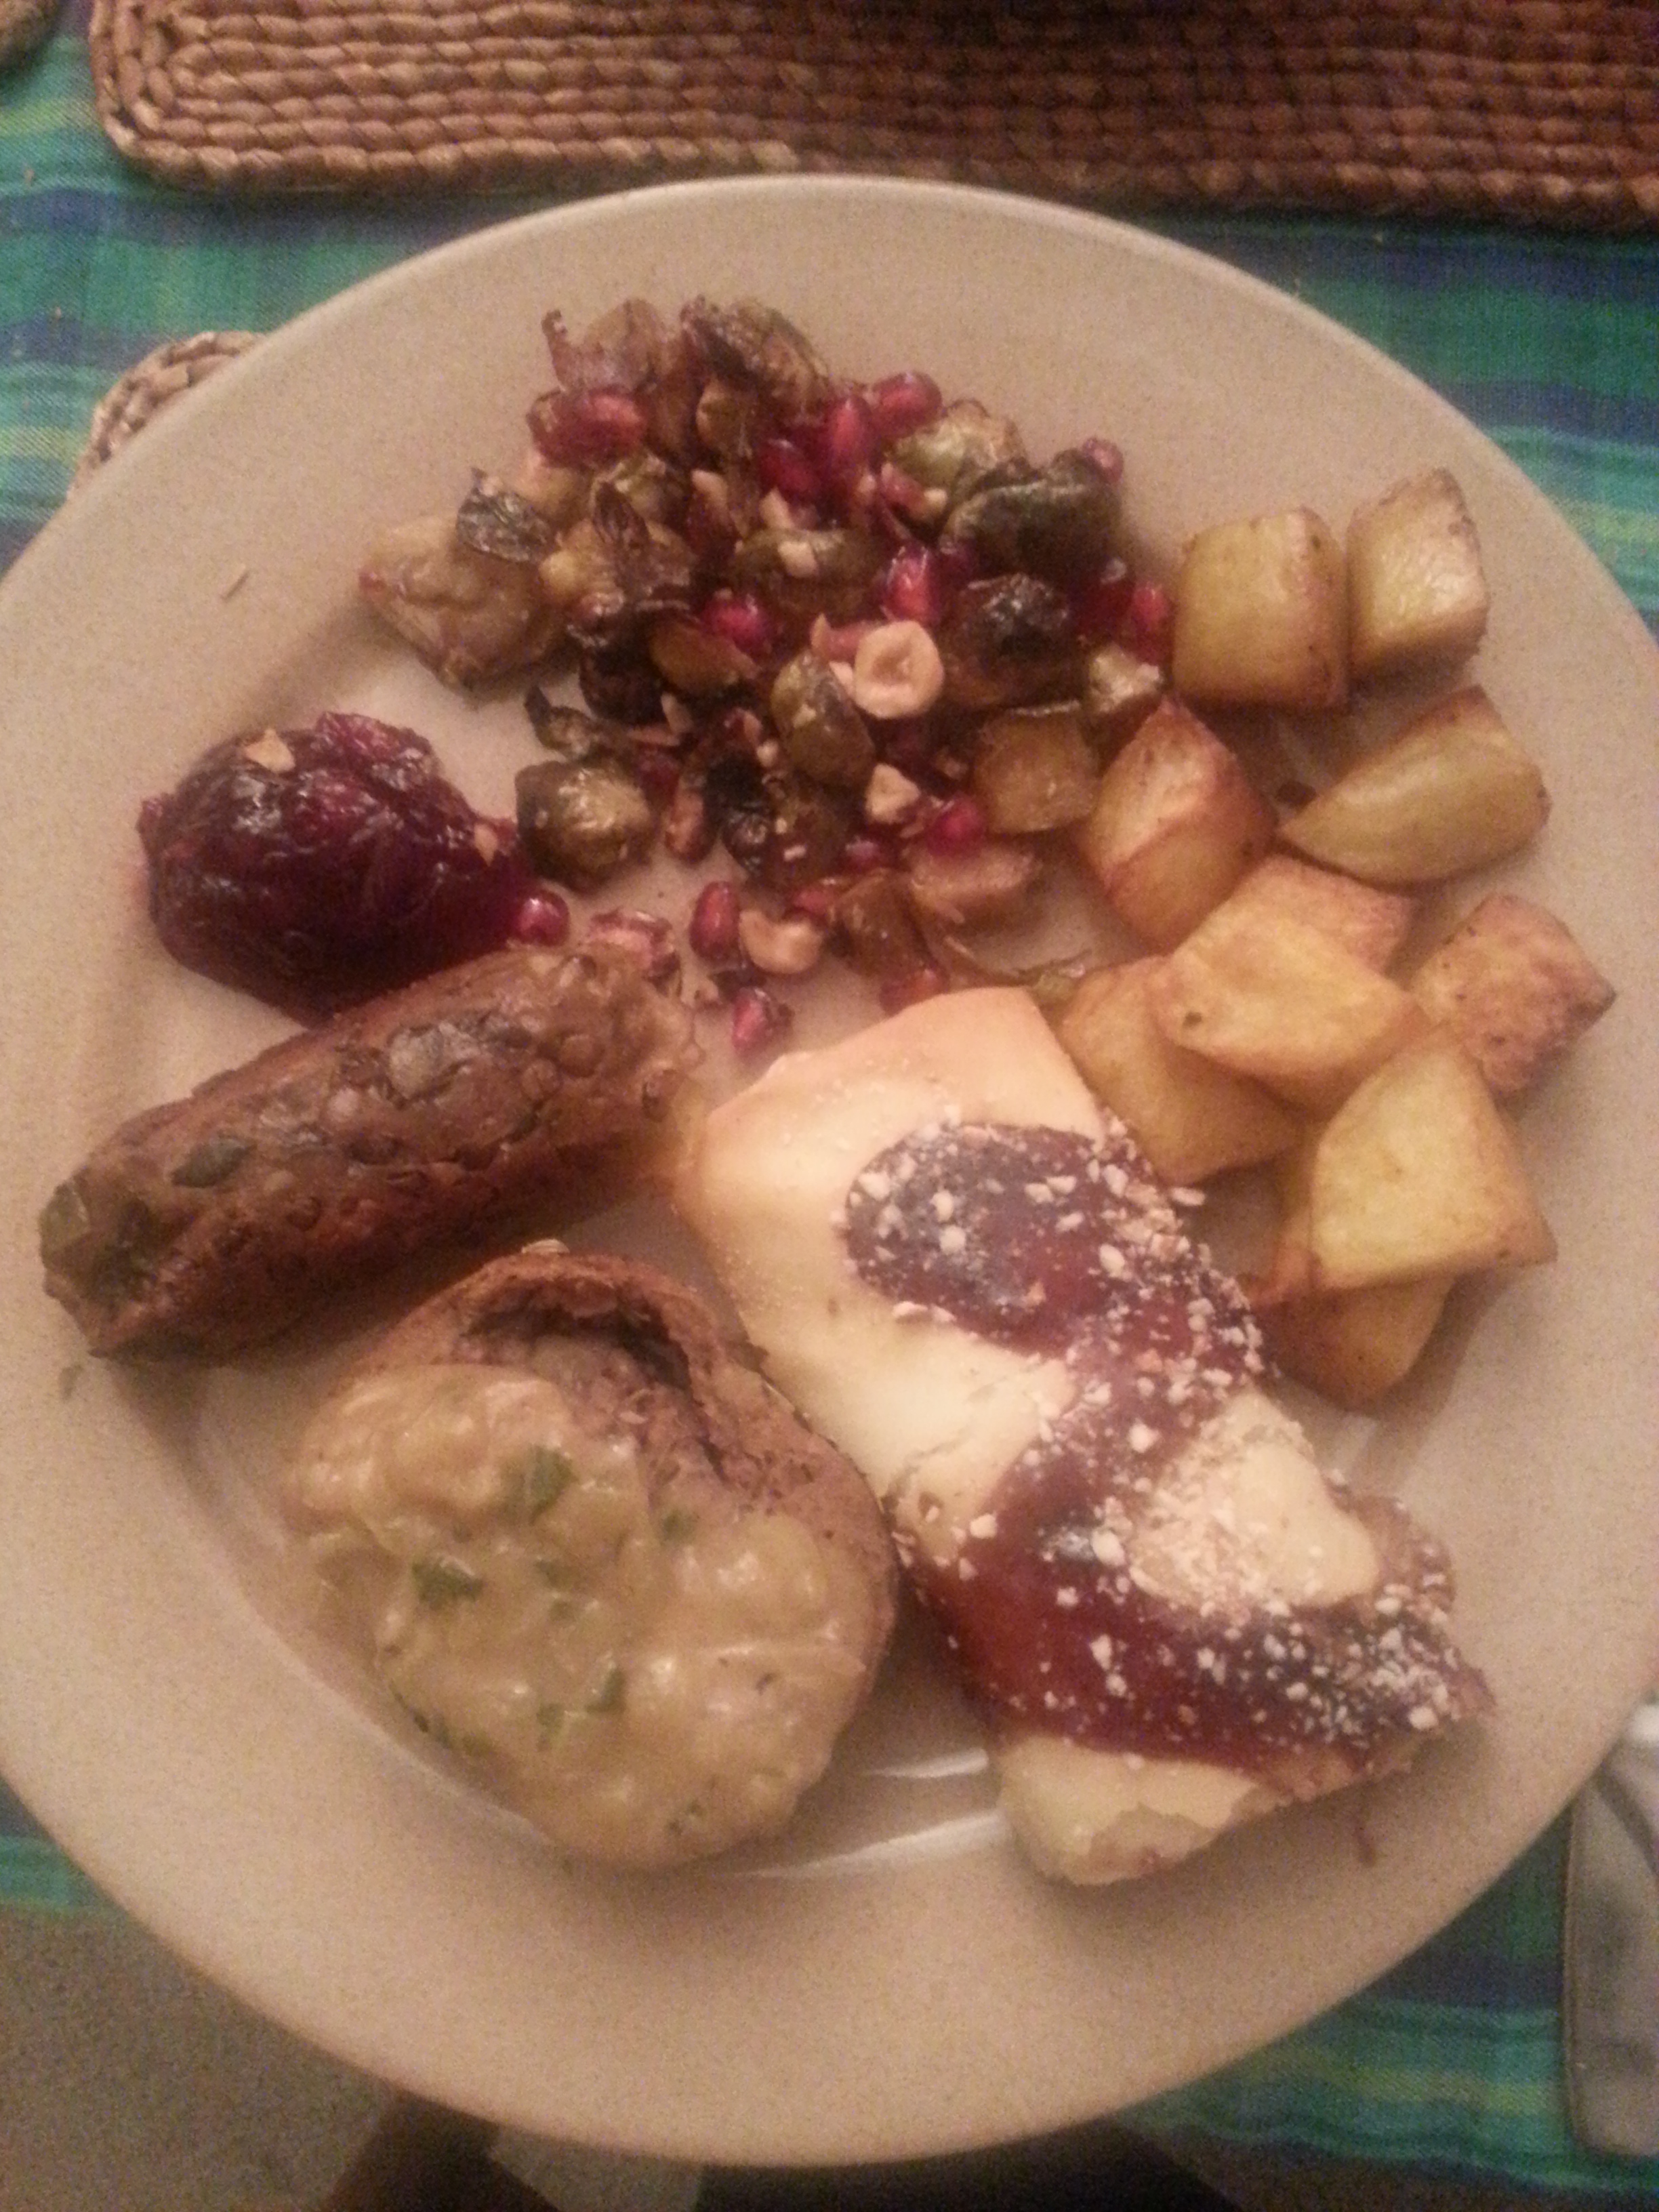 Vegan christmas dinner - handmade seitan roast and sausages. I couldn't have done it without QVH.